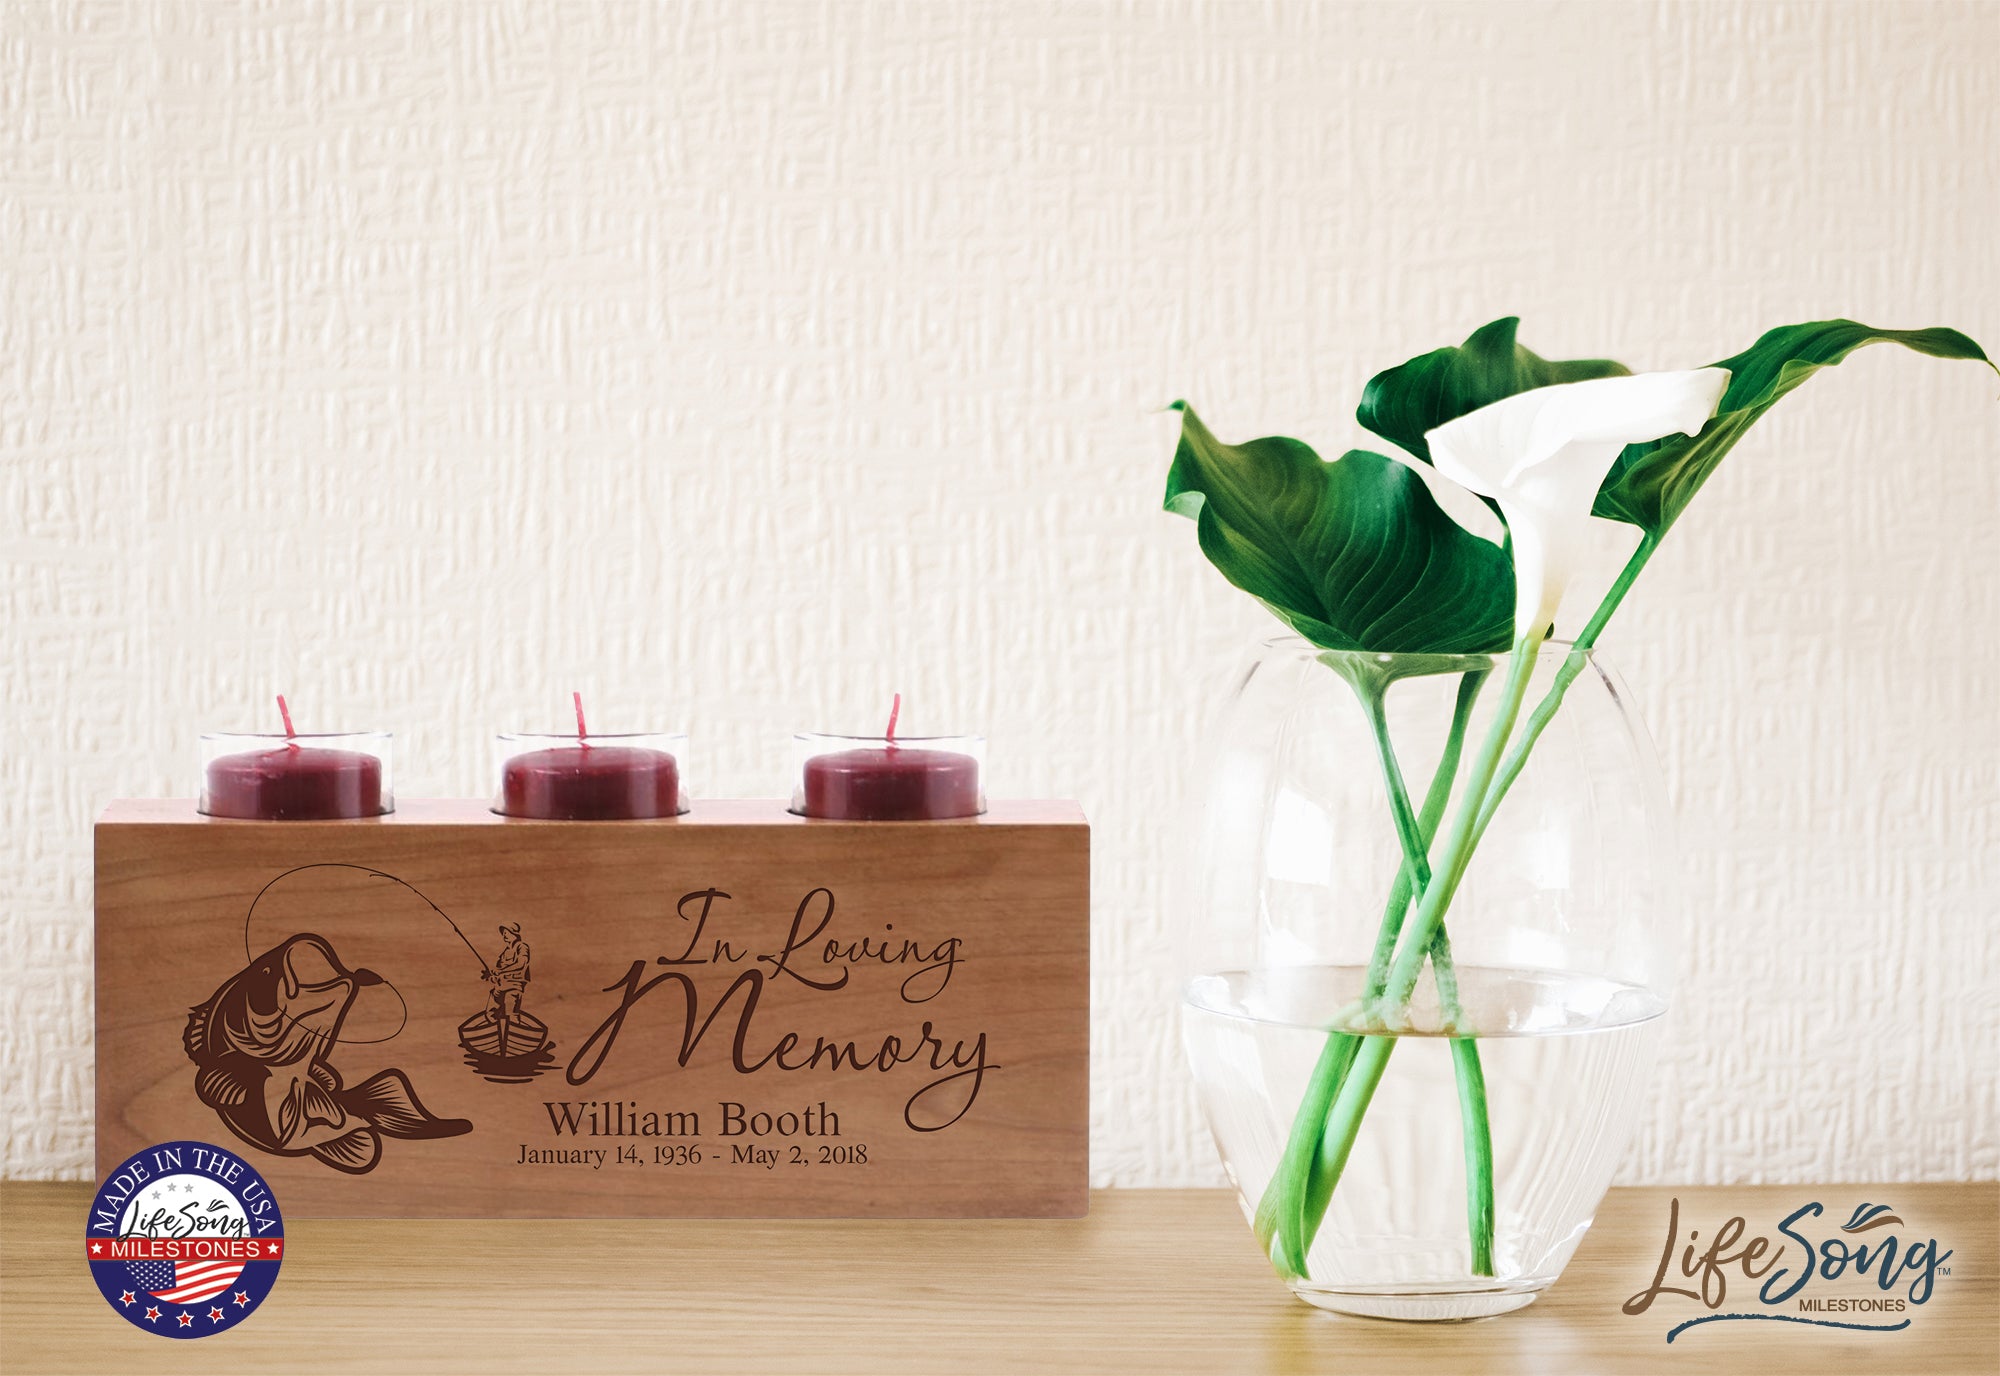 LifeSong Milestones Personalized Memorial 3 Votive Candle Holder In Loving Memory Bereavement Keepsake Candle Holder Loss of Loved One Sympathy Home Decor - 10” x 4” x 4”